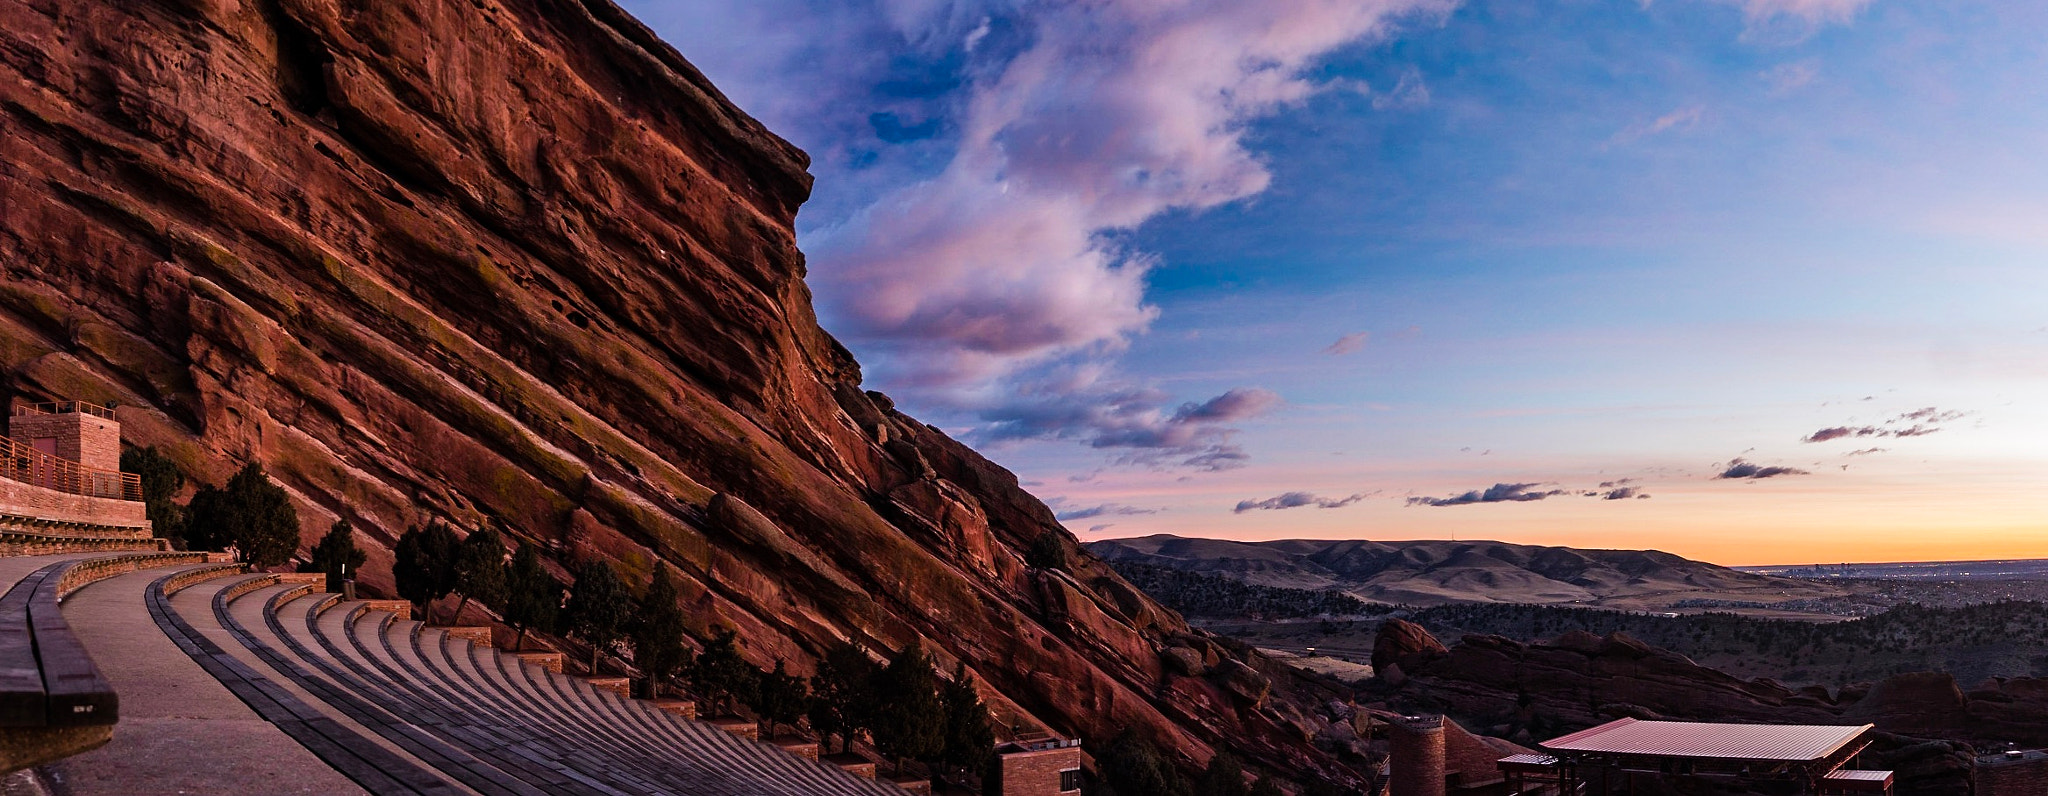 Sony a6300 sample photo. Red rocks amphitheater at dawn photography